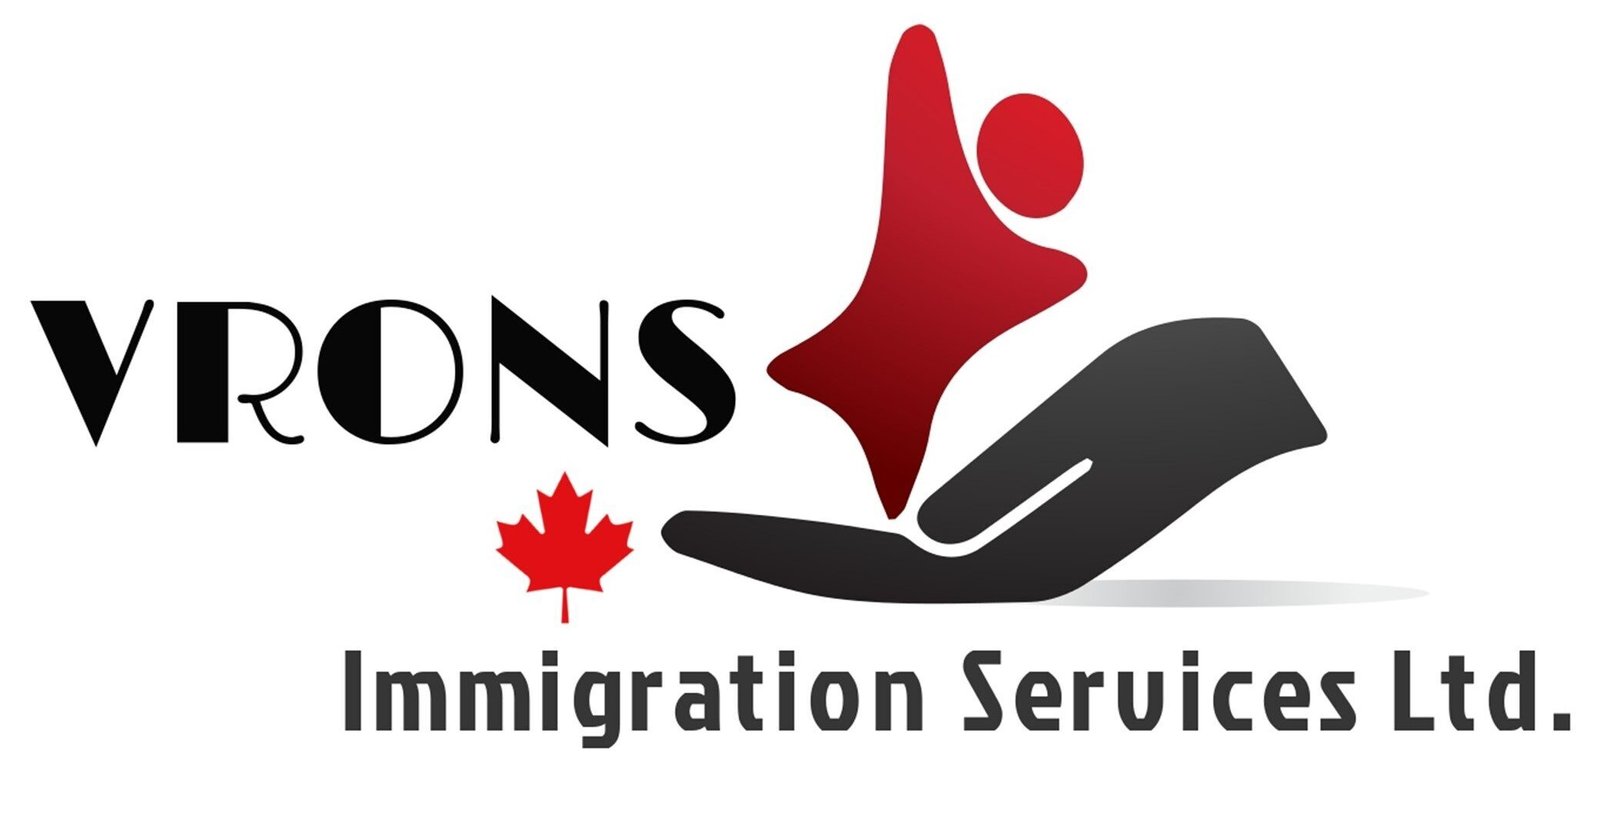 Vrons Immigration